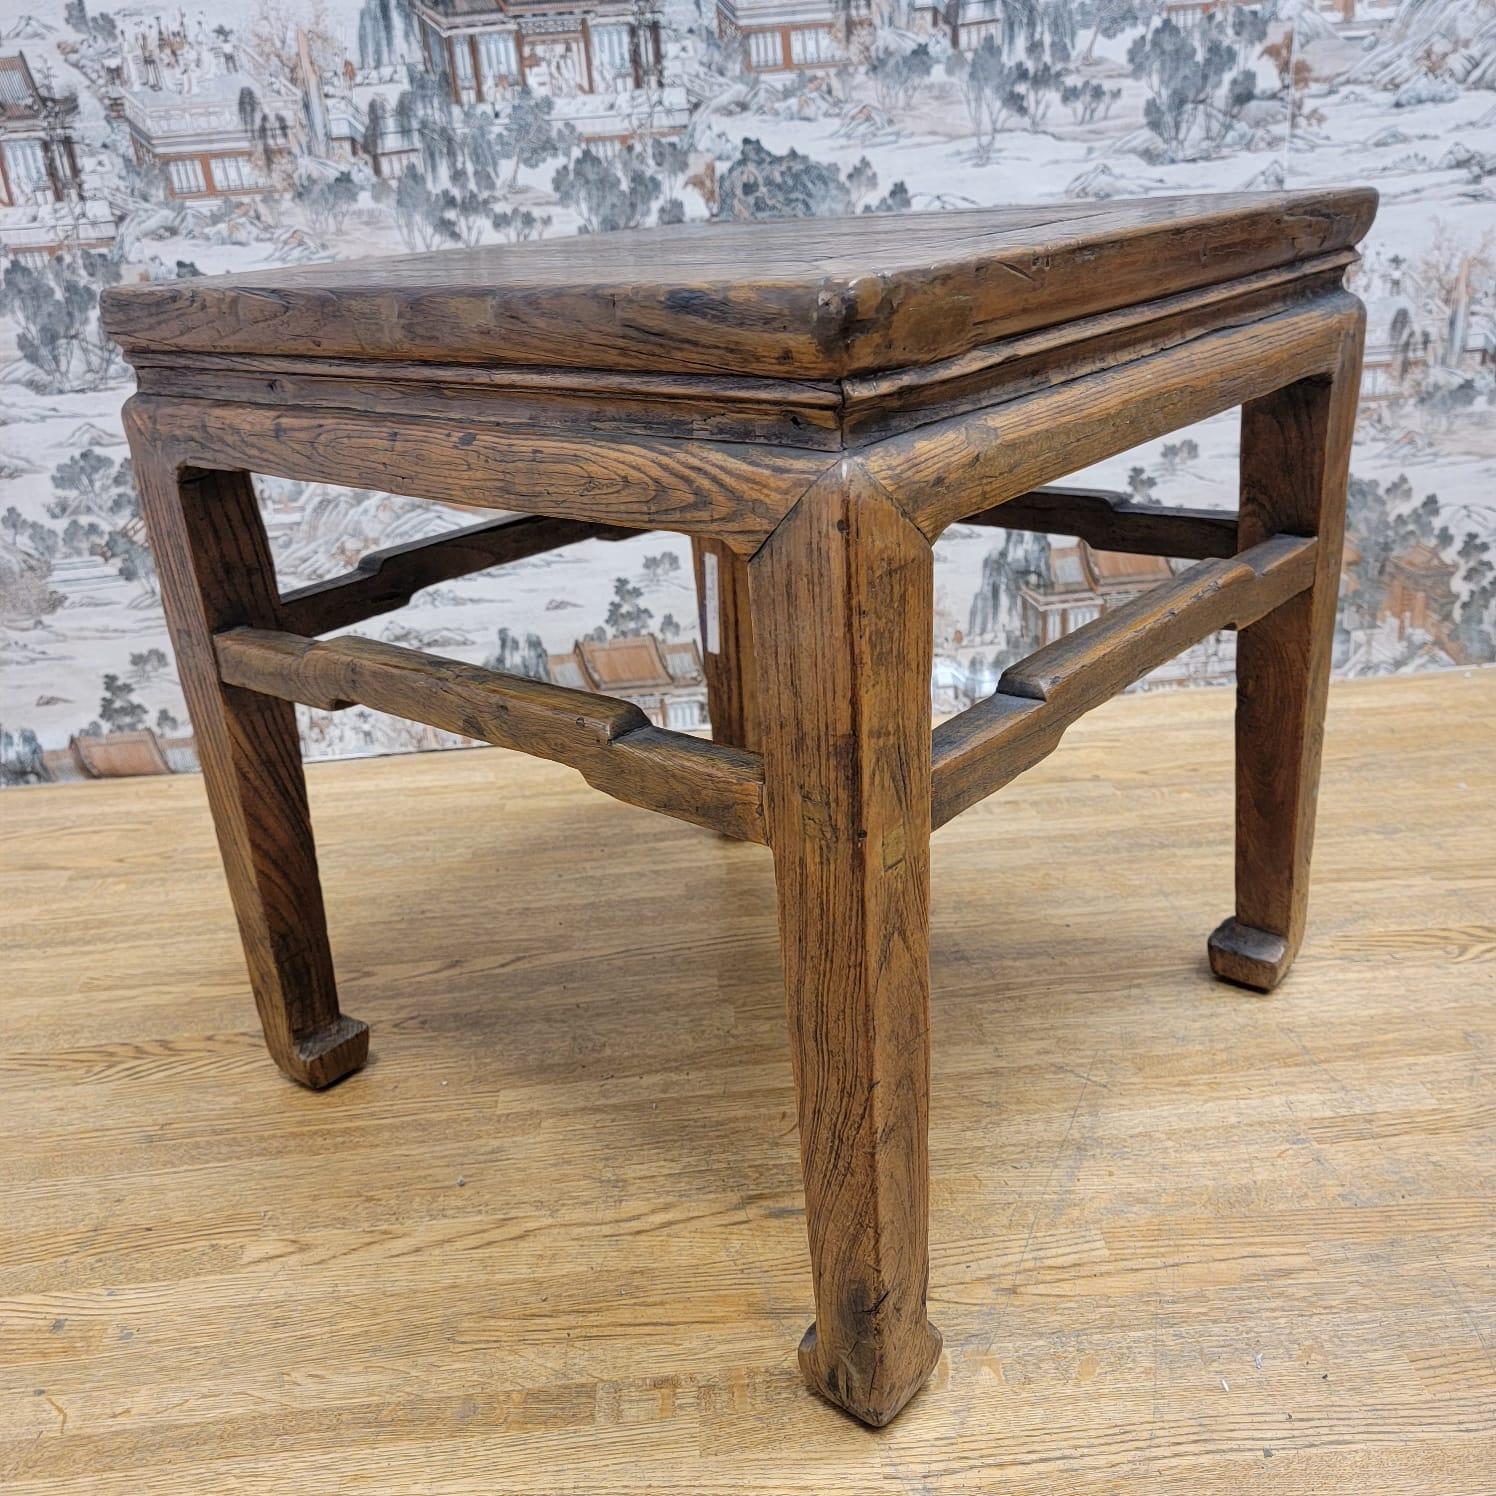 Antique Shanxi Province Elm Natural Patina Square Side Table

This square side table from the Shanxi Province of China has natural patina and color. 

Circa: 1900

Dimensions:

W: 20